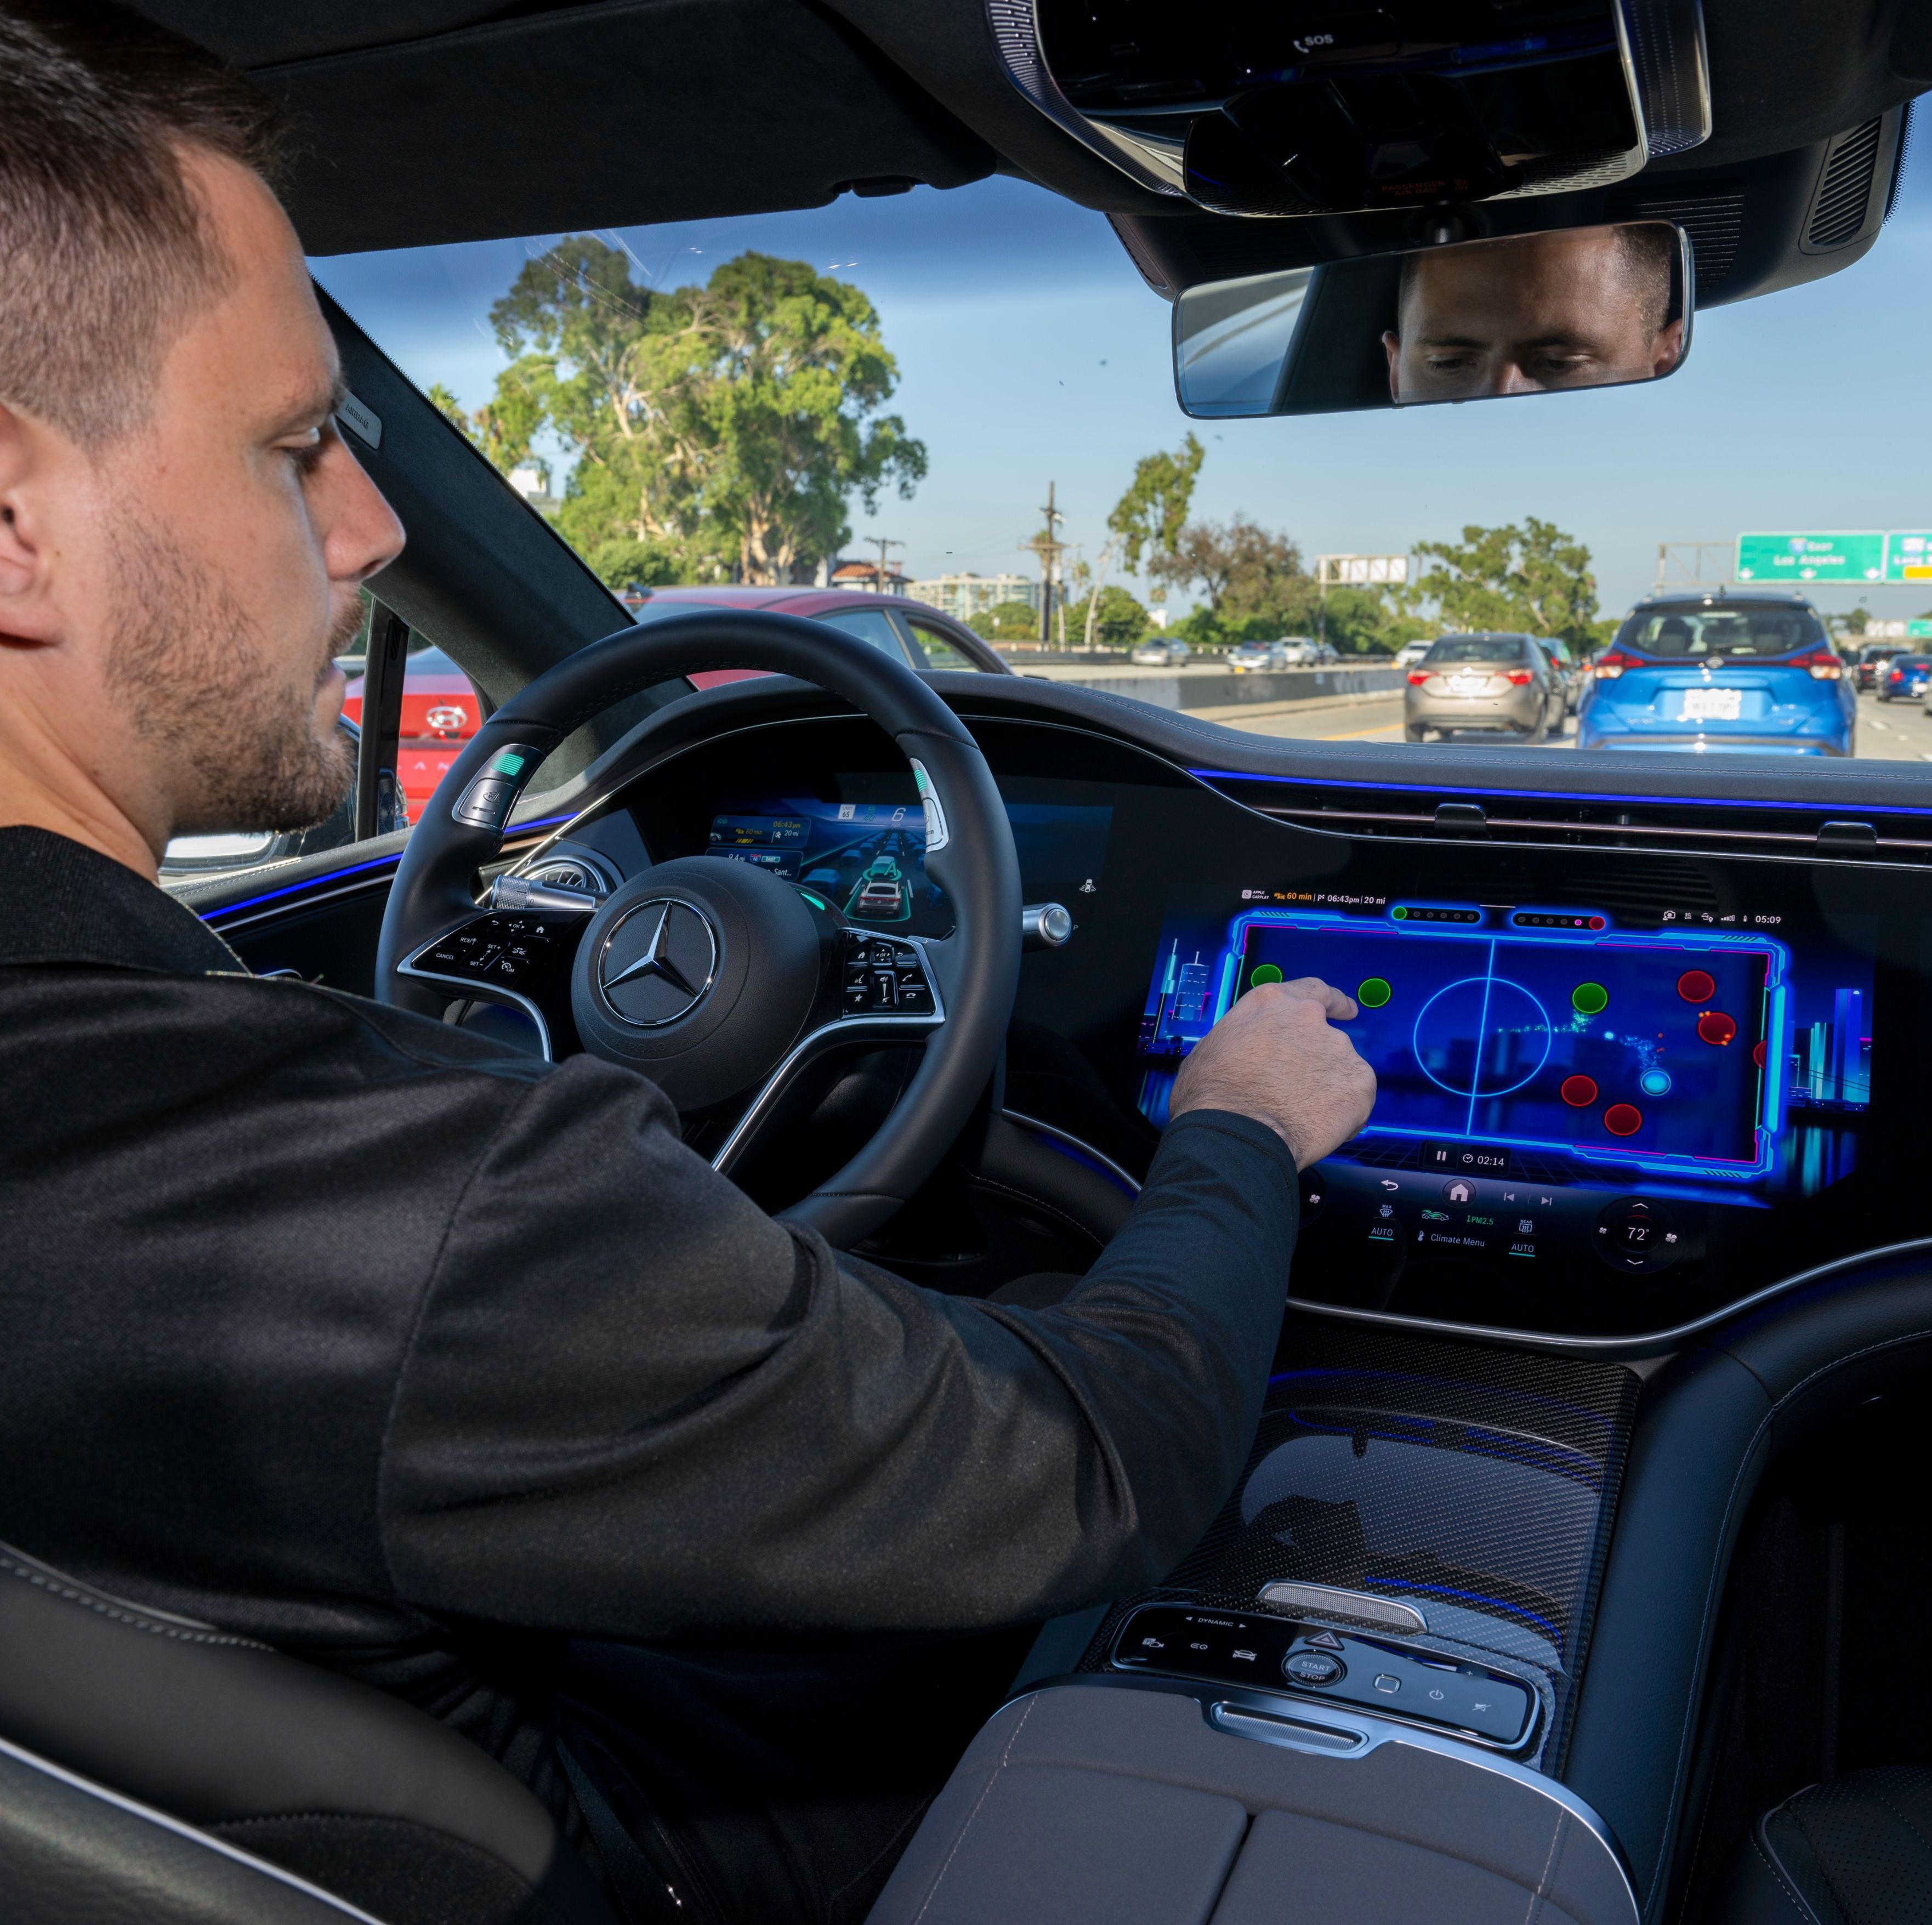 Mercedes Drive Pilot with Level 3 Autonomy Available Soon in California, Nevada